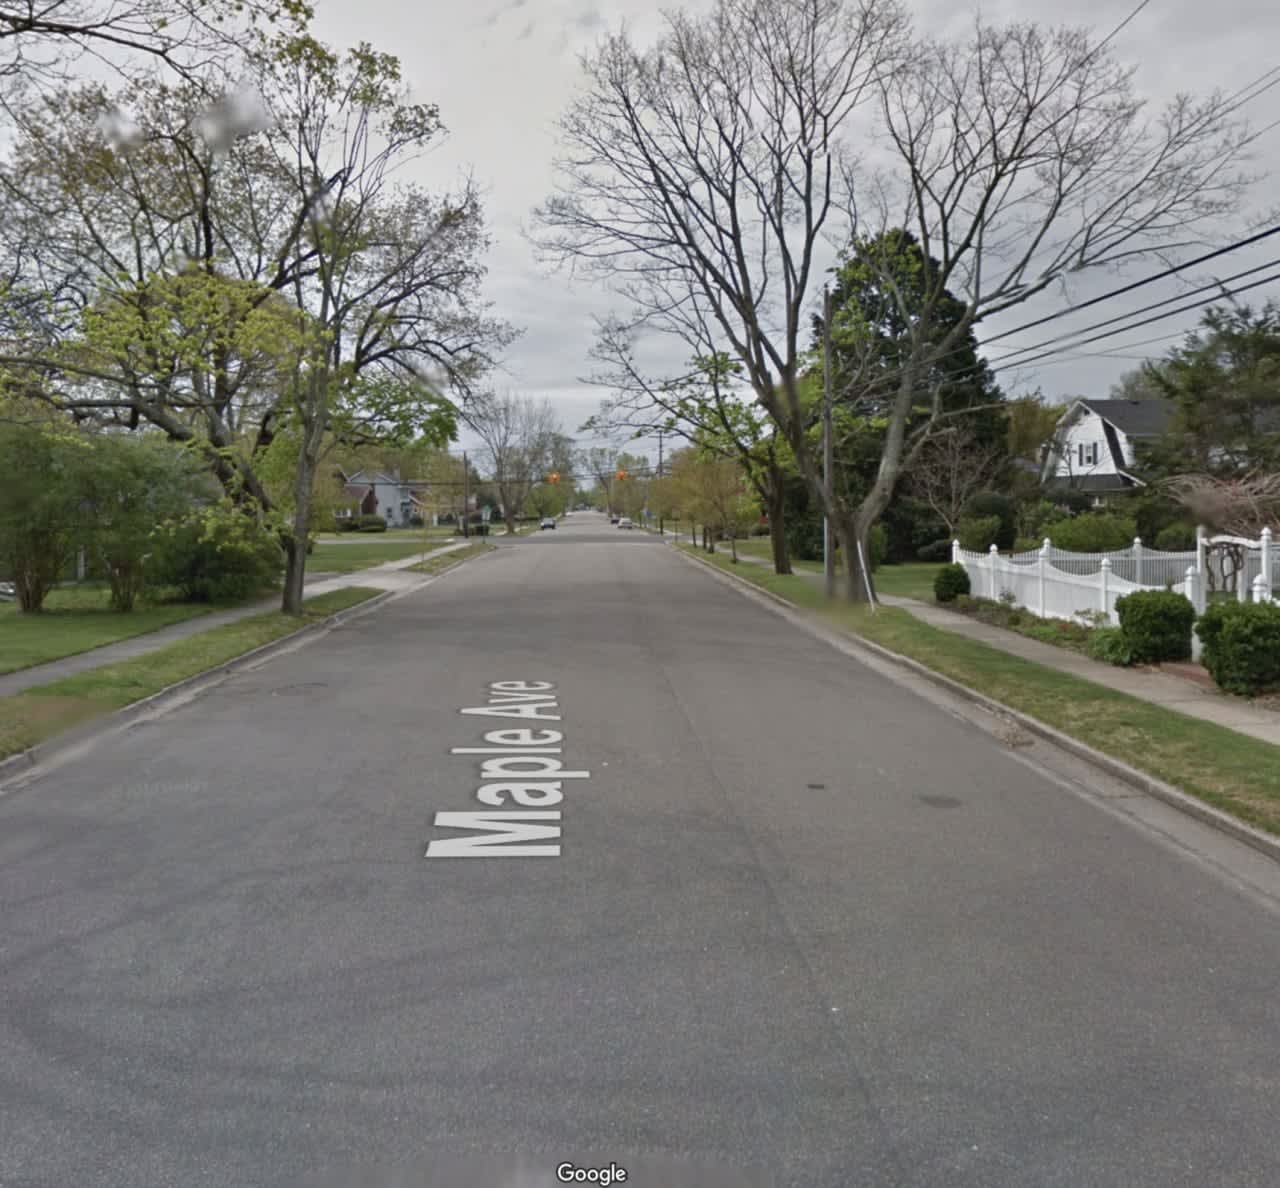 A man was found shot and killed on Maple Avenue in Patchogue